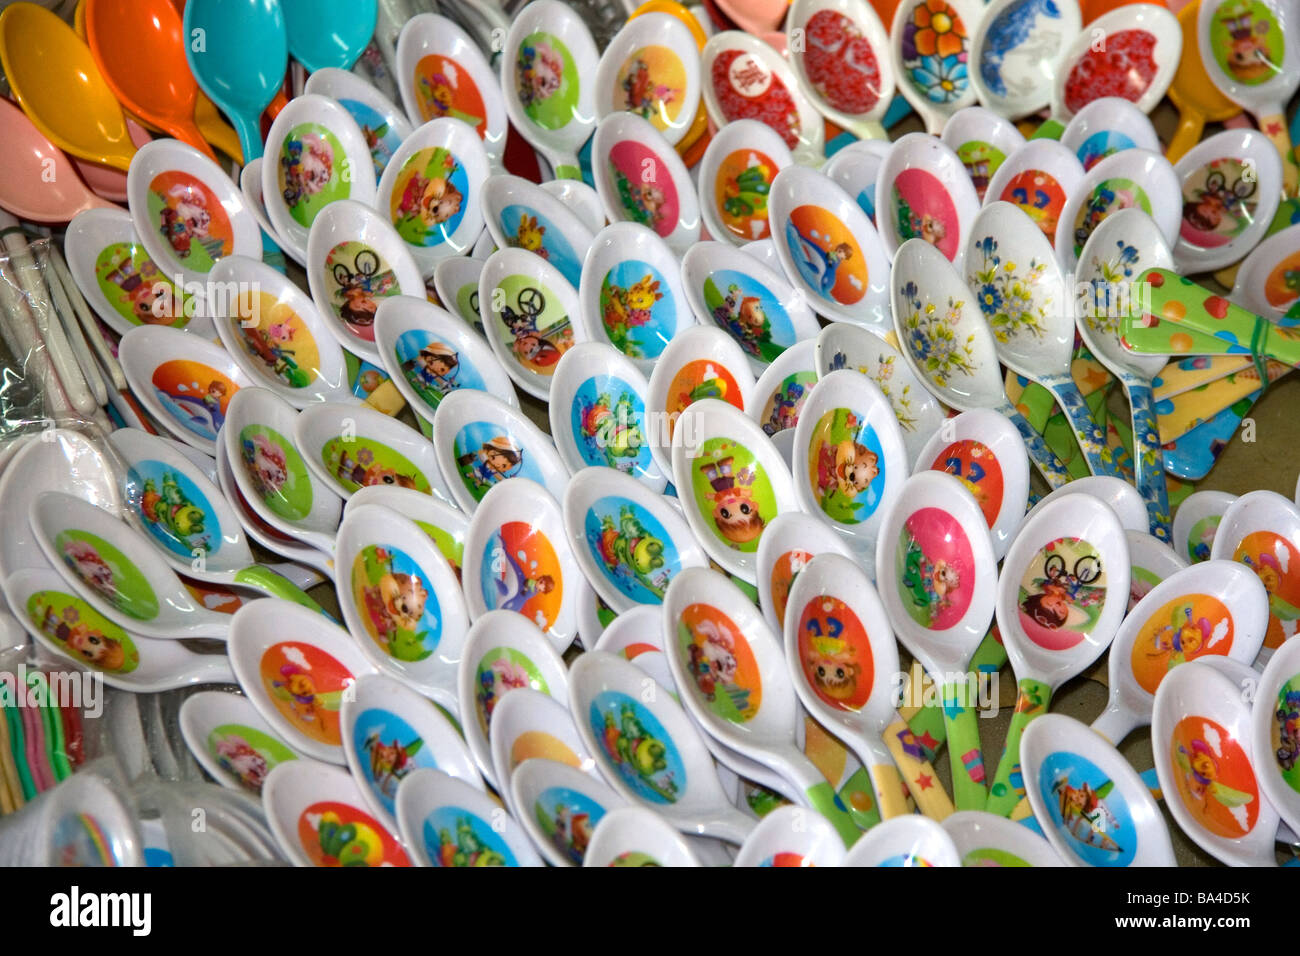 Soup spoons being sold at a market in the Cholon district of Ho Chi Minh City Vietnam Stock Photo